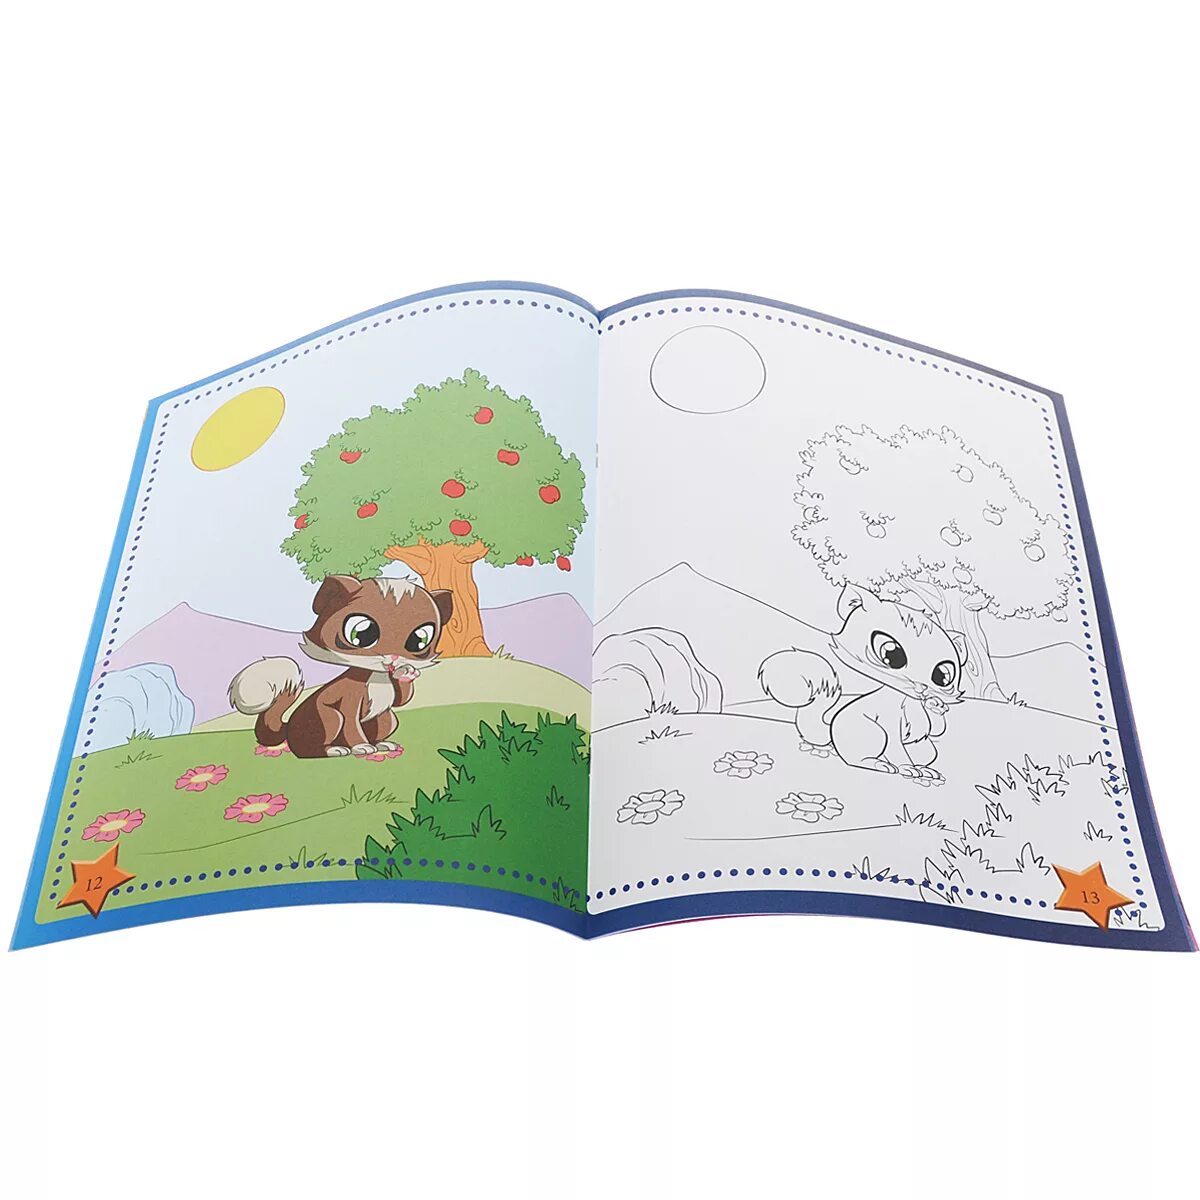 Dazzling coloring magic page